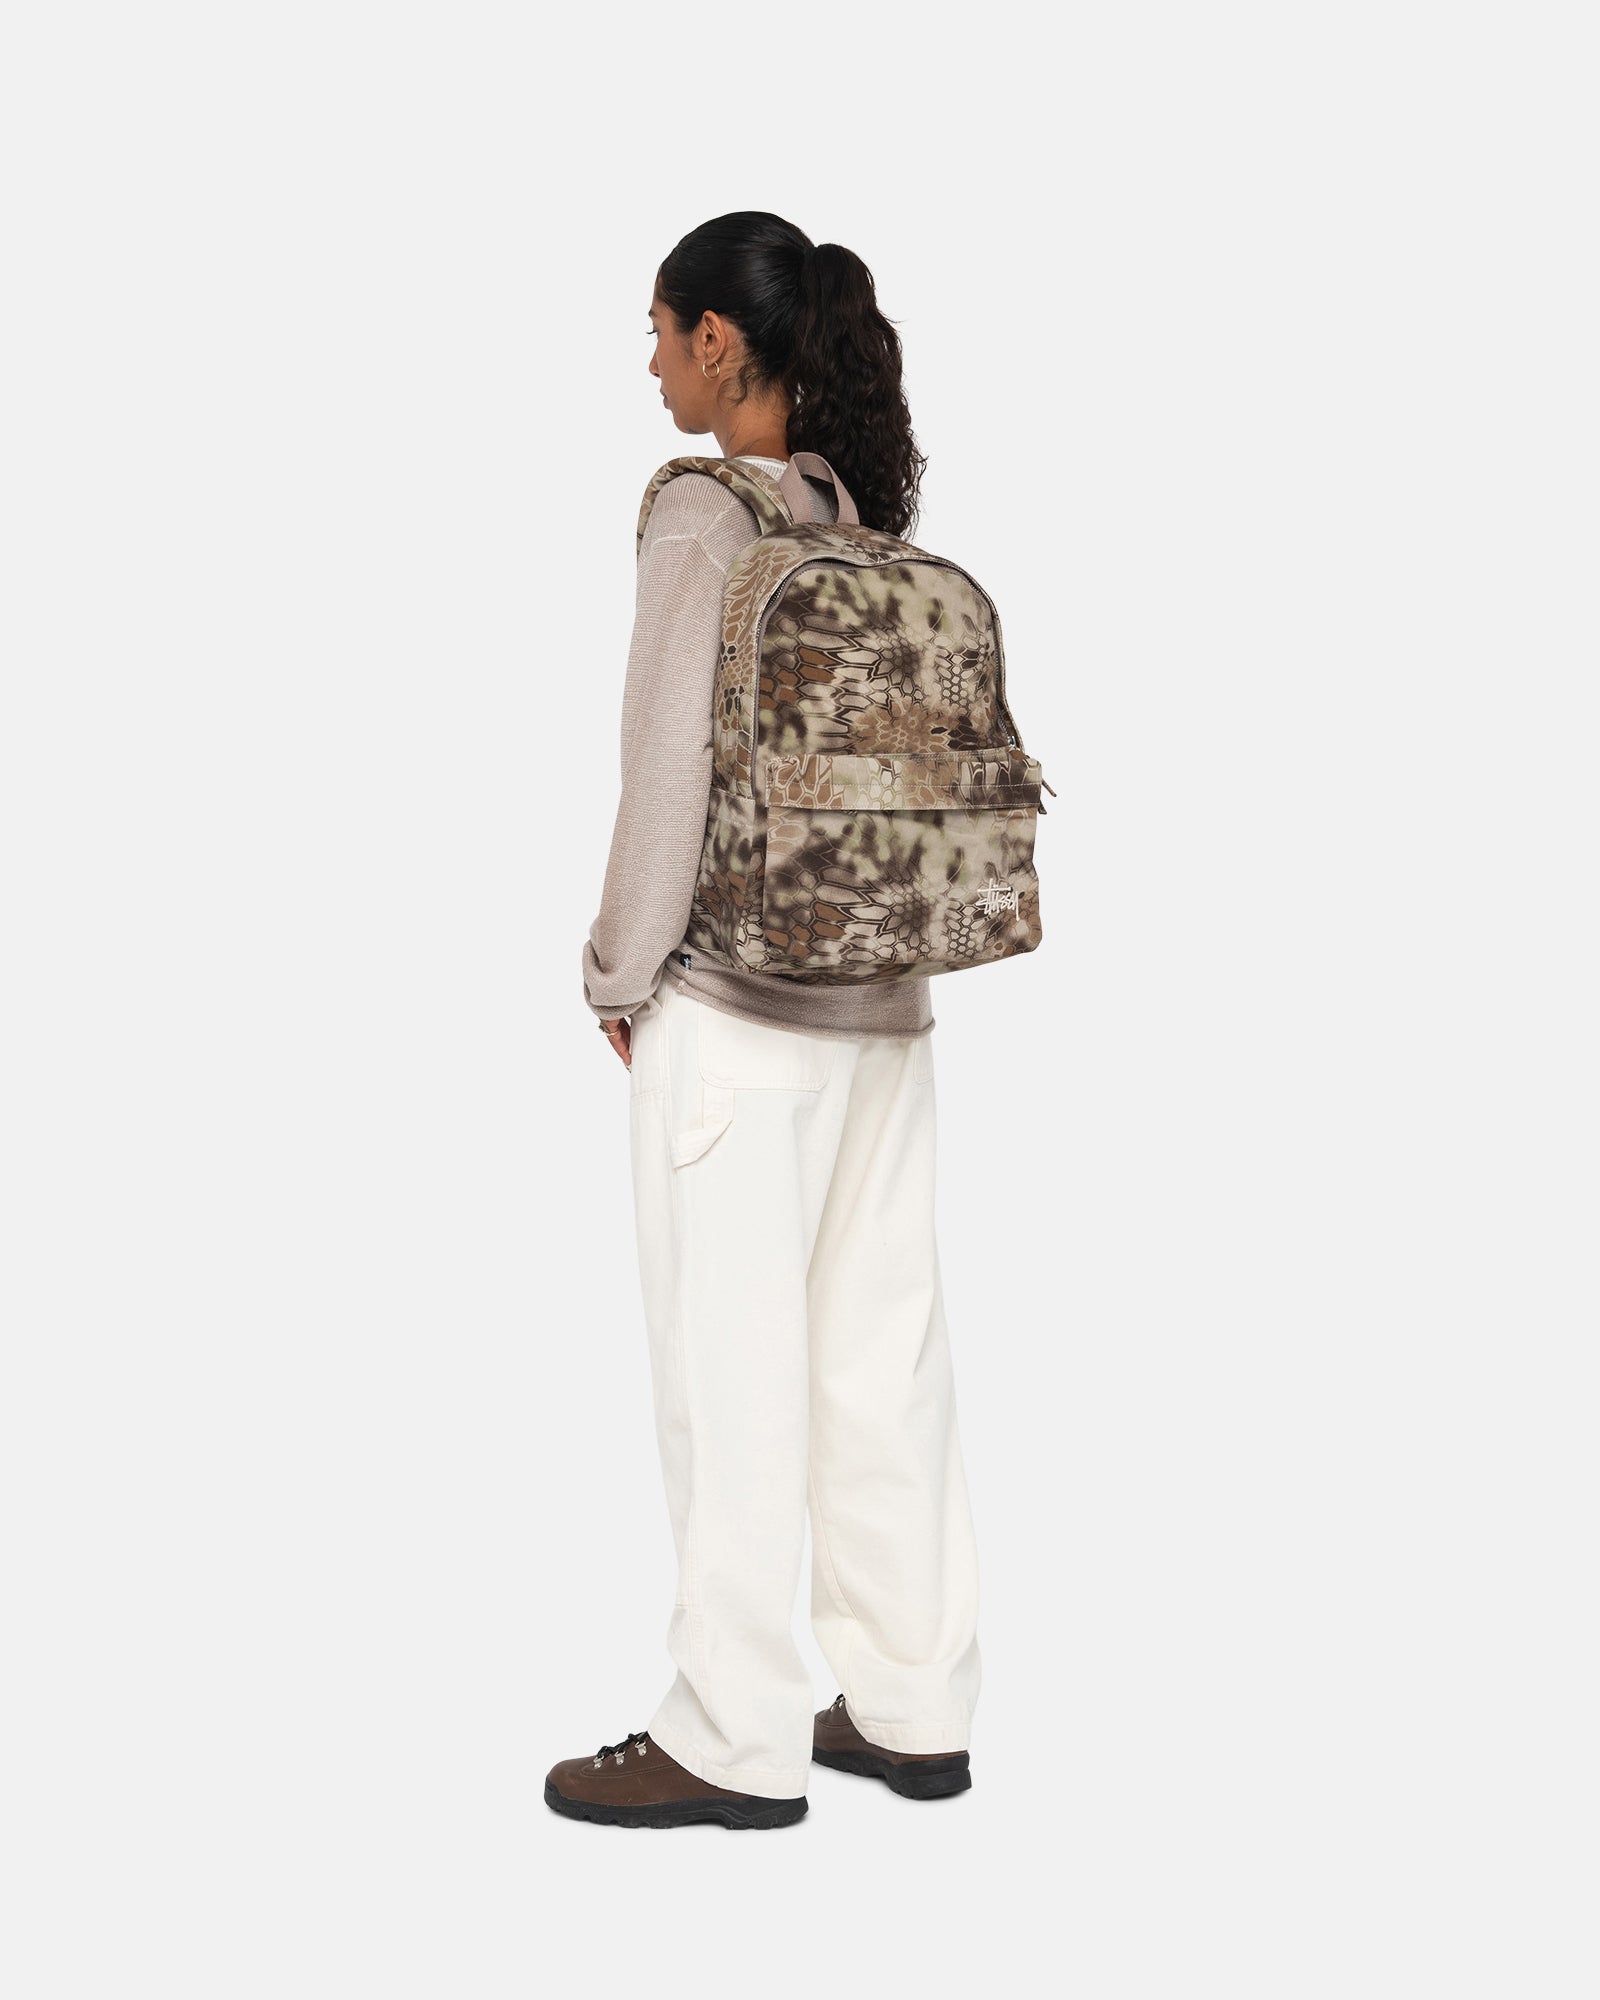 STUSSY CANVAS BACKPACK-